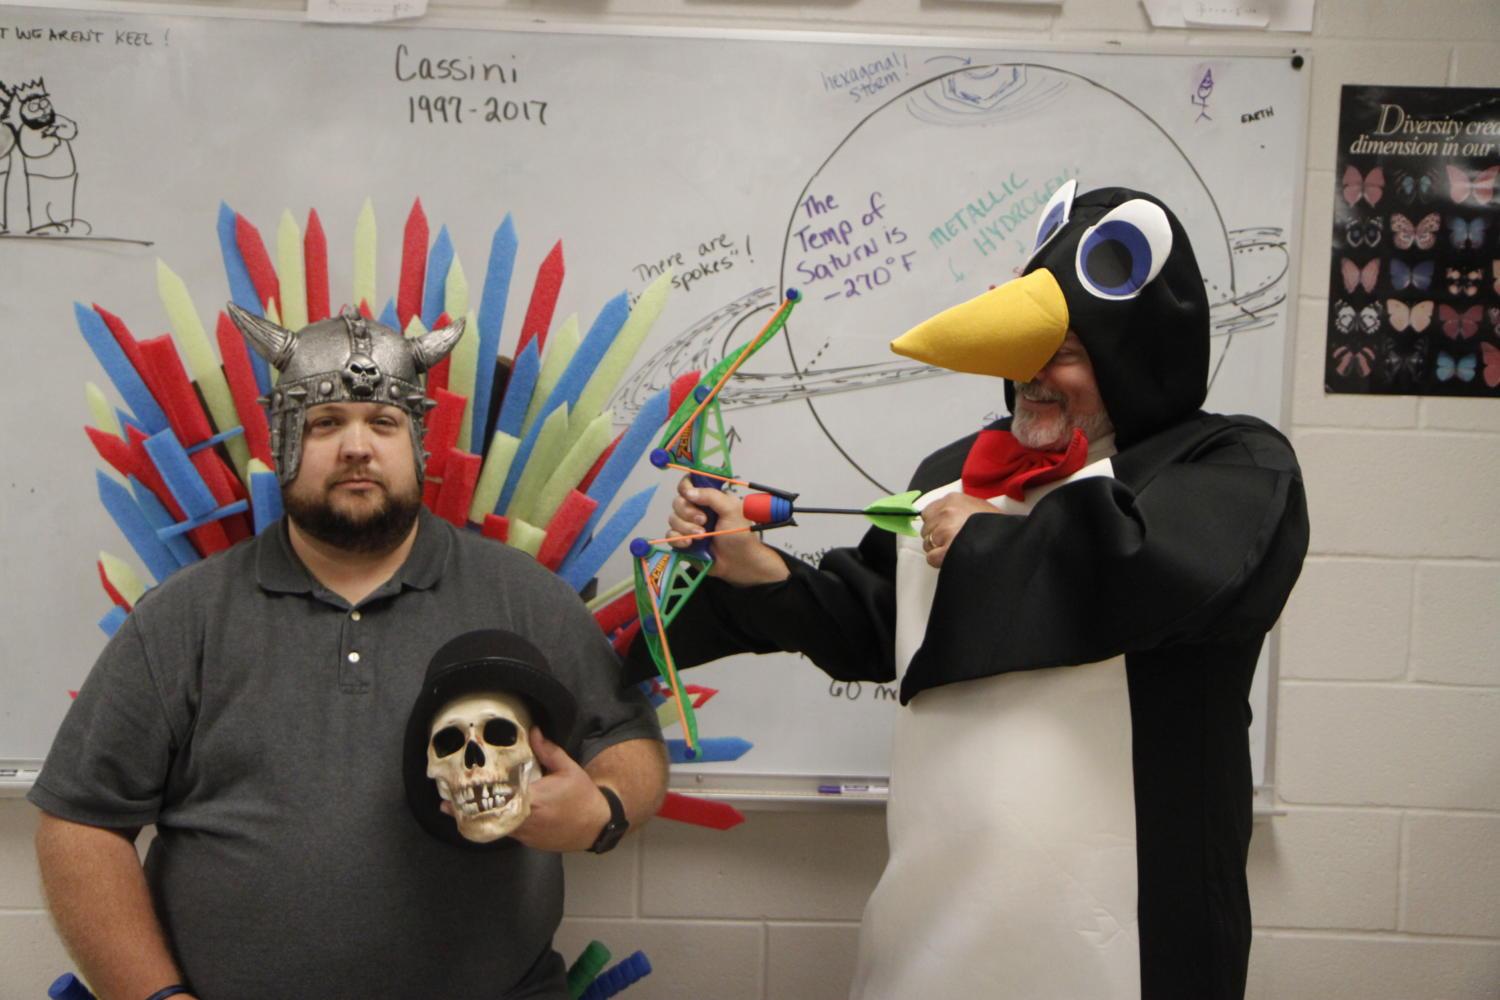 Dressed as a Viking and a penguin, Mr. John Sudbury and Mr. John Davis pose for a photo to demonstrate their unique relationship.